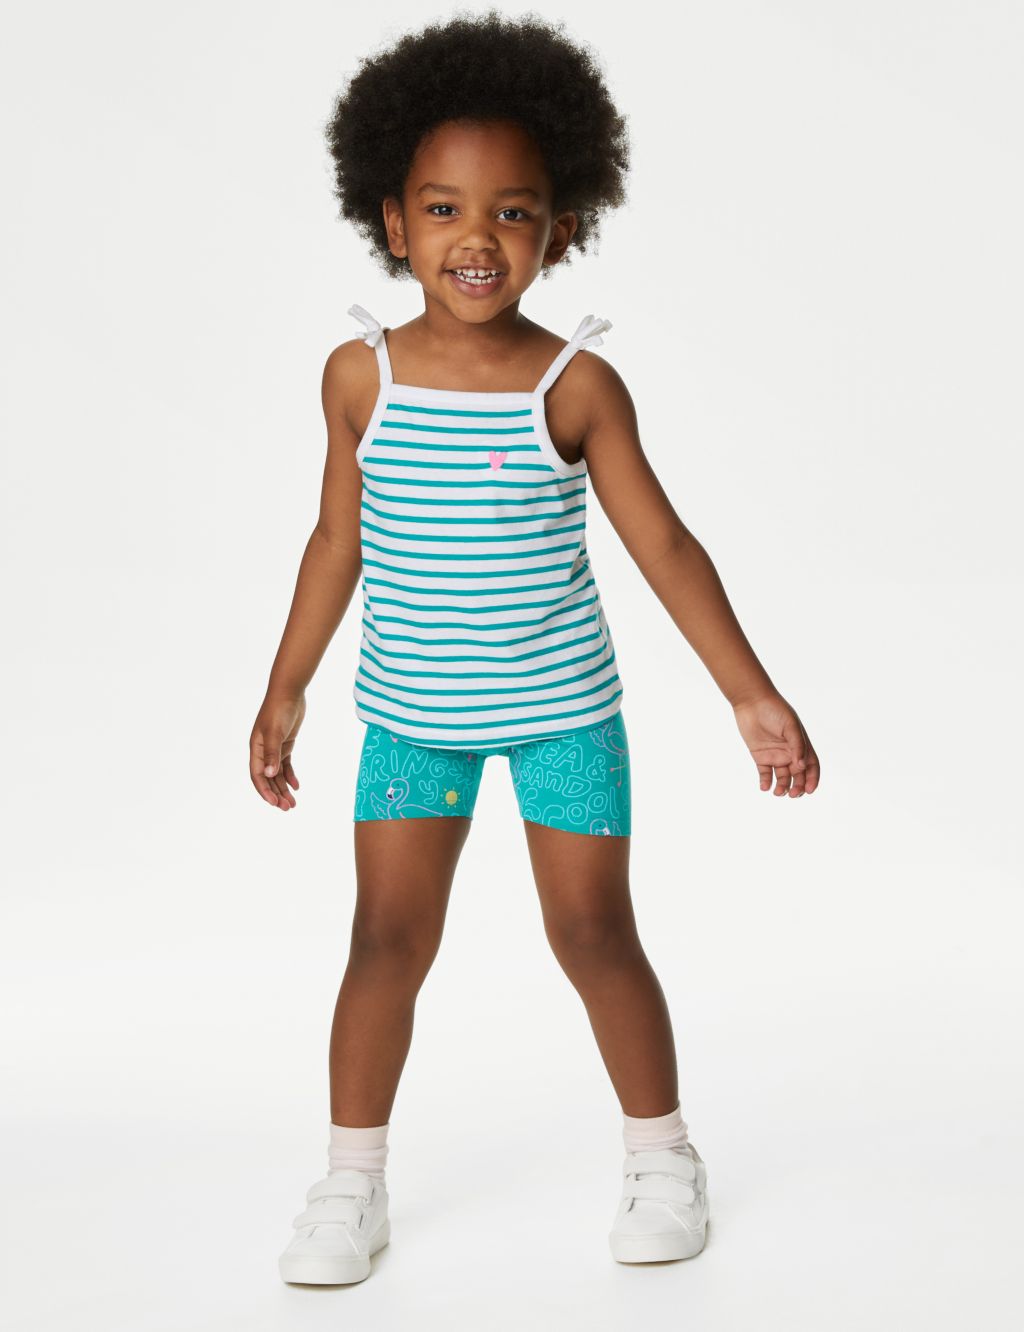 Cotton Rich Striped Top & Bottom Outfit (2-8 Yrs) image 1